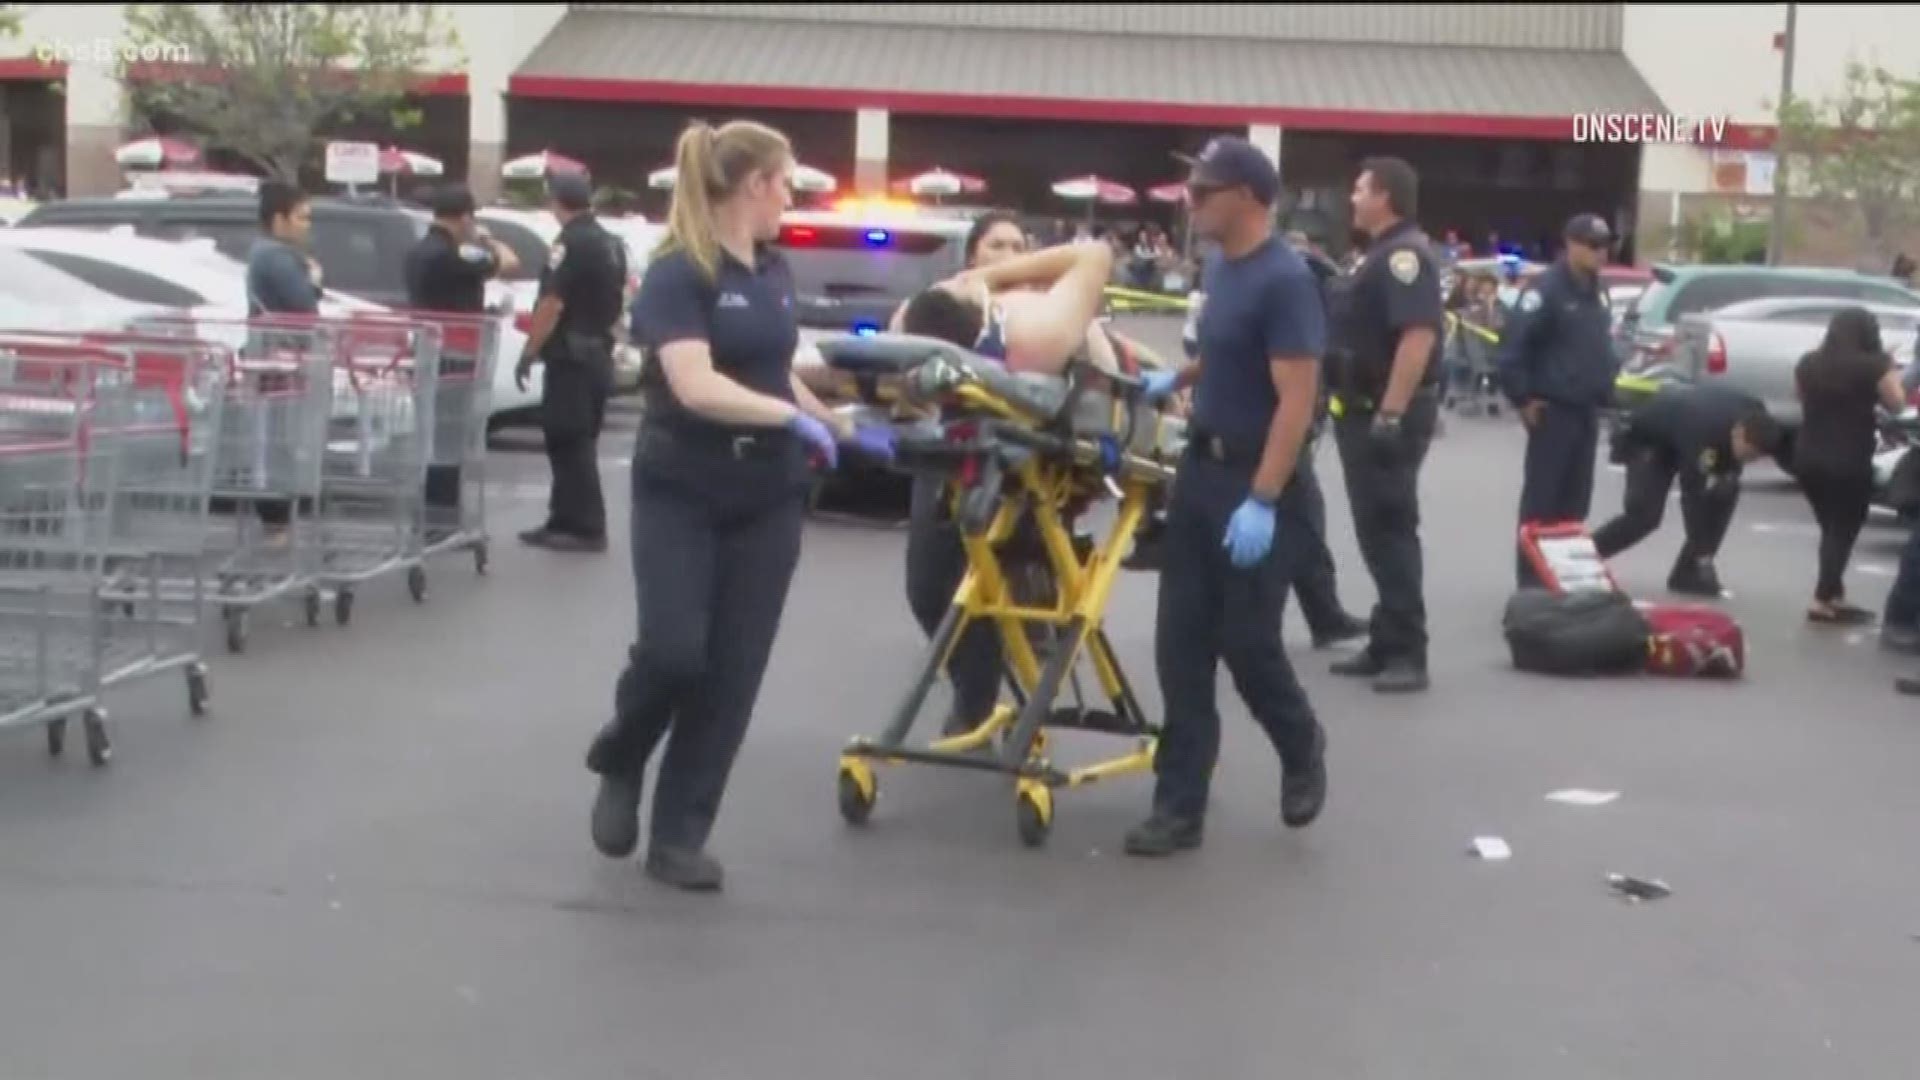 An eyewitness recounts the moment a man allegedly shot his ex-girlfriend and her boyfriend outside a Costco in Chula Vista and then shot and killed himself. The violence played out with the woman's newborn baby nearby in a stroller.